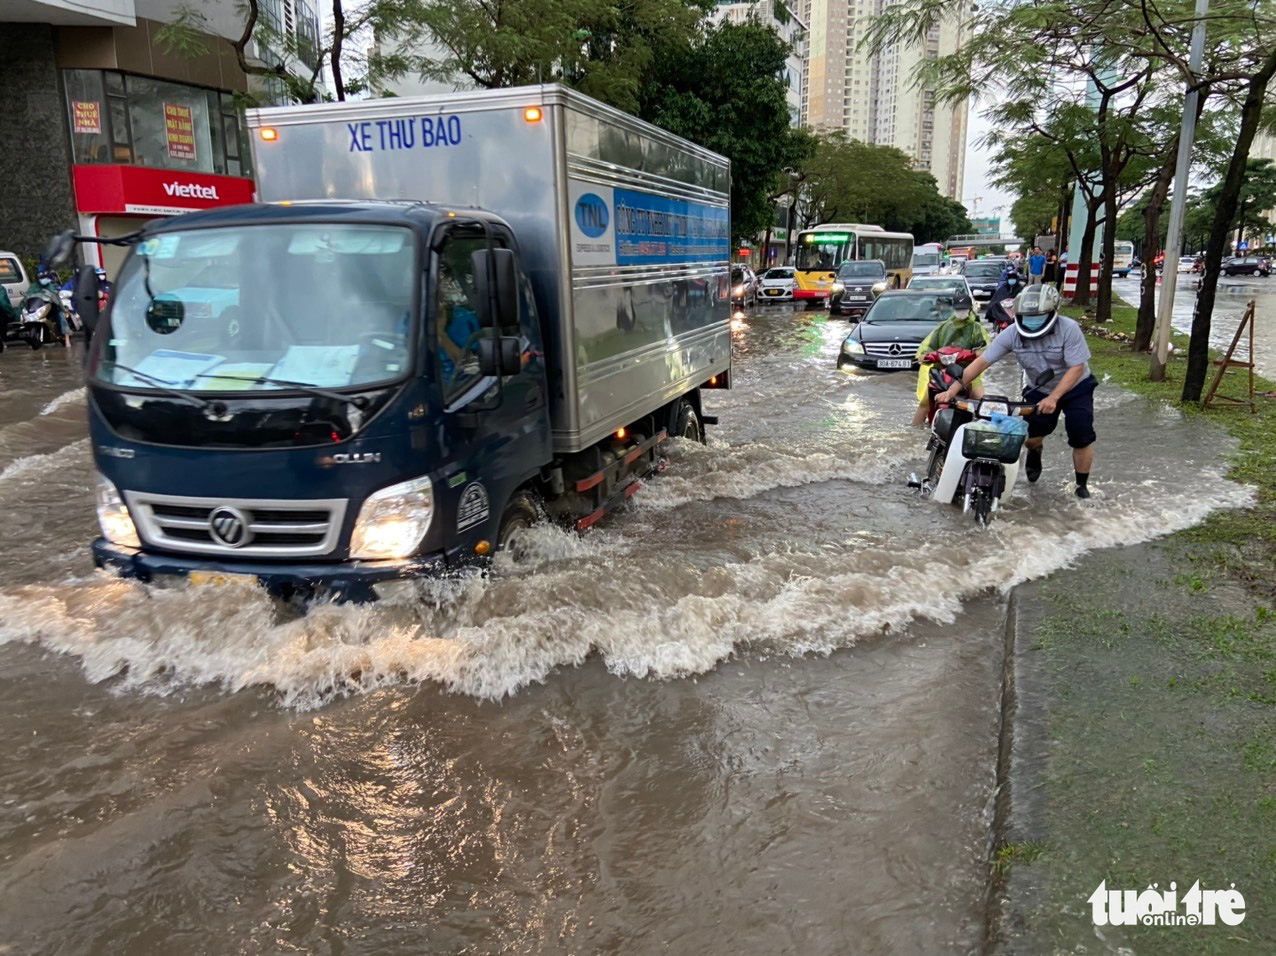 Vehicles wade through a flooded street in Hanoi, May 29, 2022. Photo: Quang The / Tuoi Tre